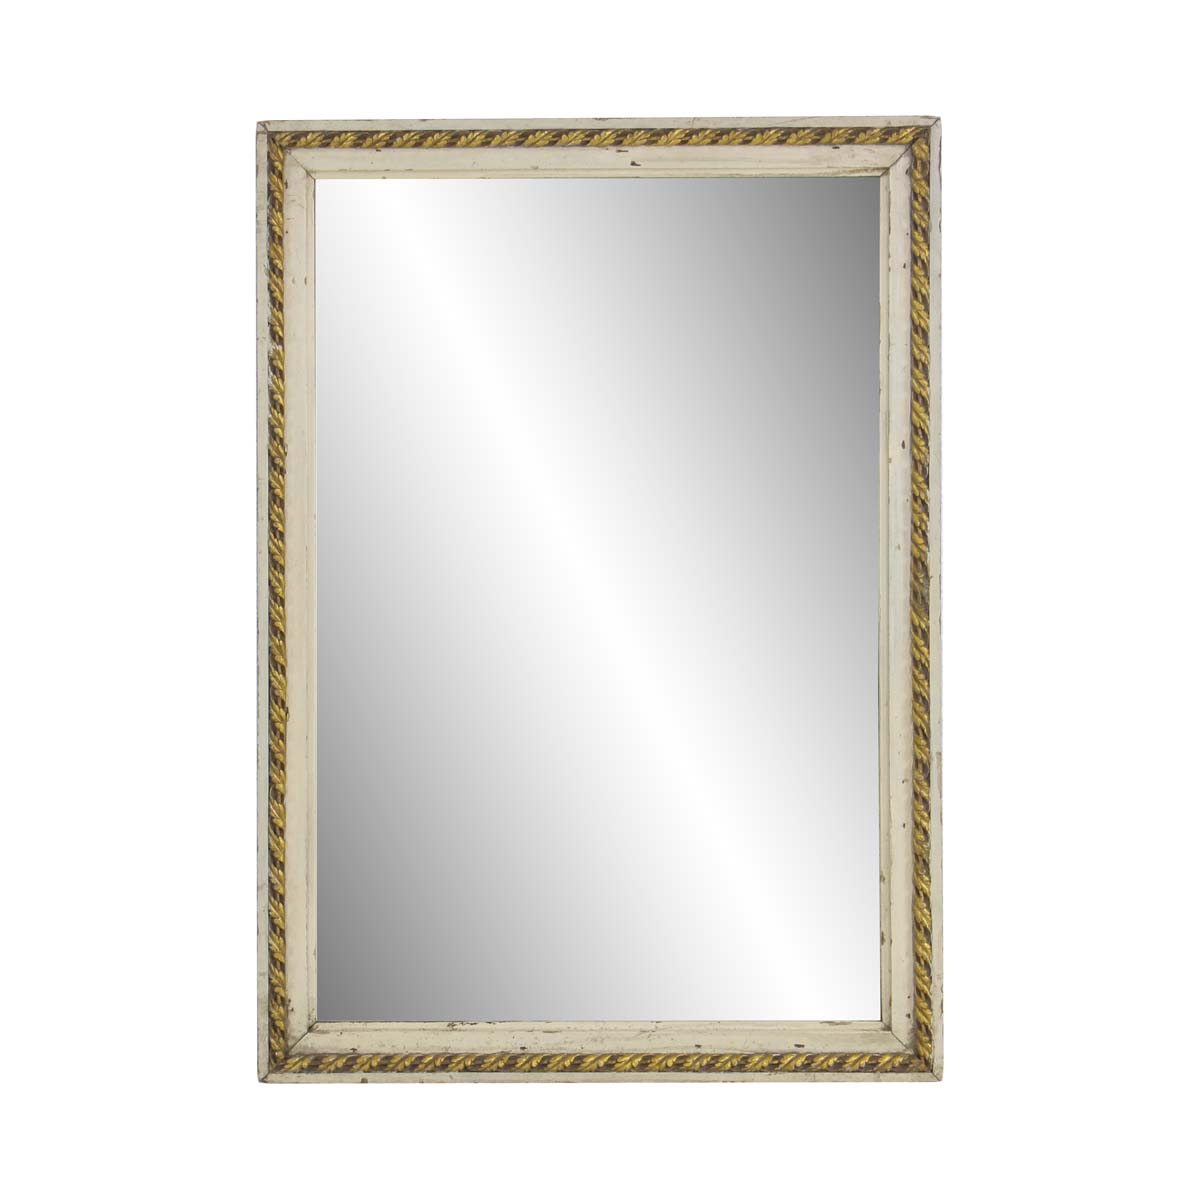 https://ogtstore.com/wp-content/uploads/2023/05/wood-molding-mirrors-handcrafted-antique-white-gold-leaf-frame-wall-mirror-q280378.jpg